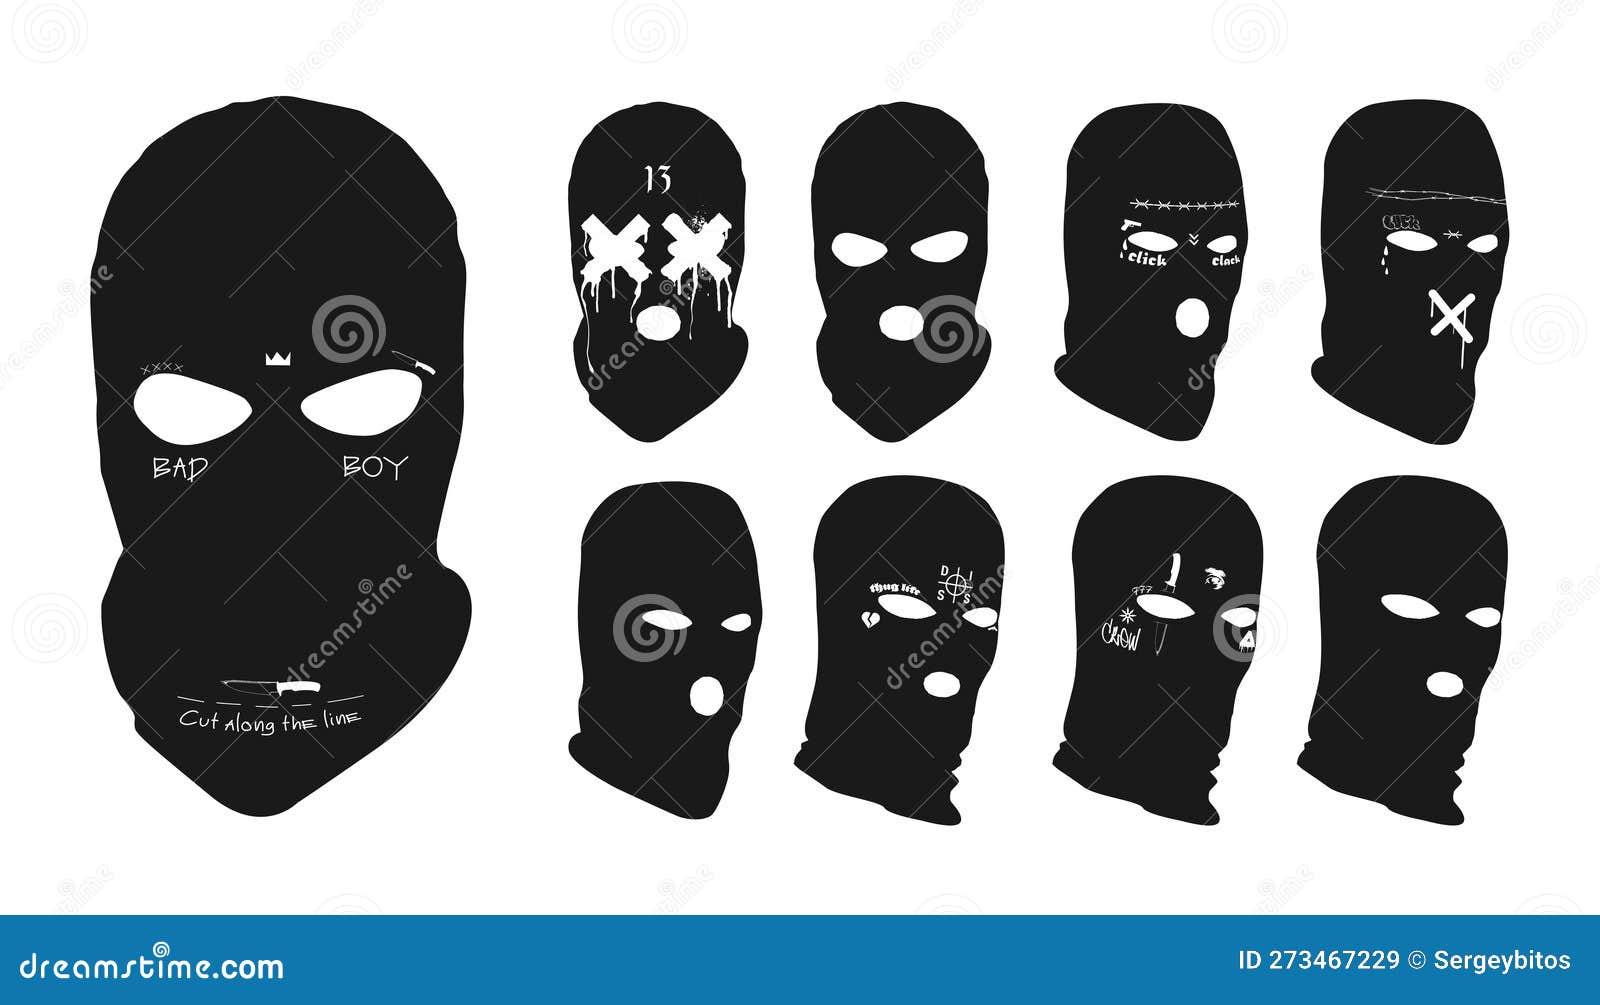 gangster masks with images and inscriptions, stylish balaclavas